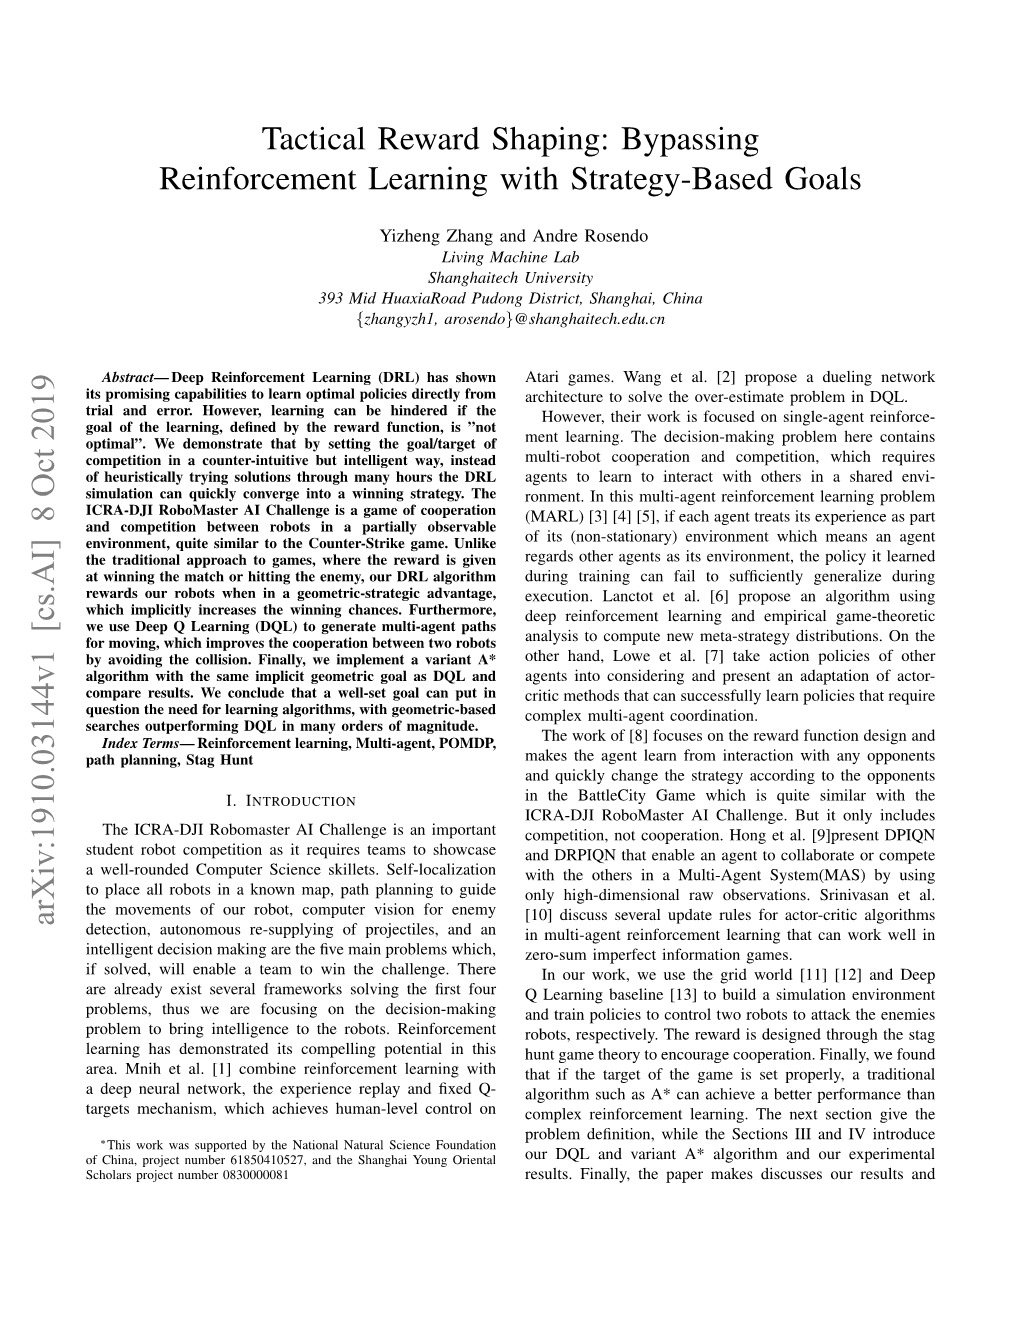 Bypassing Reinforcement Learning with Strategy-Based Goals